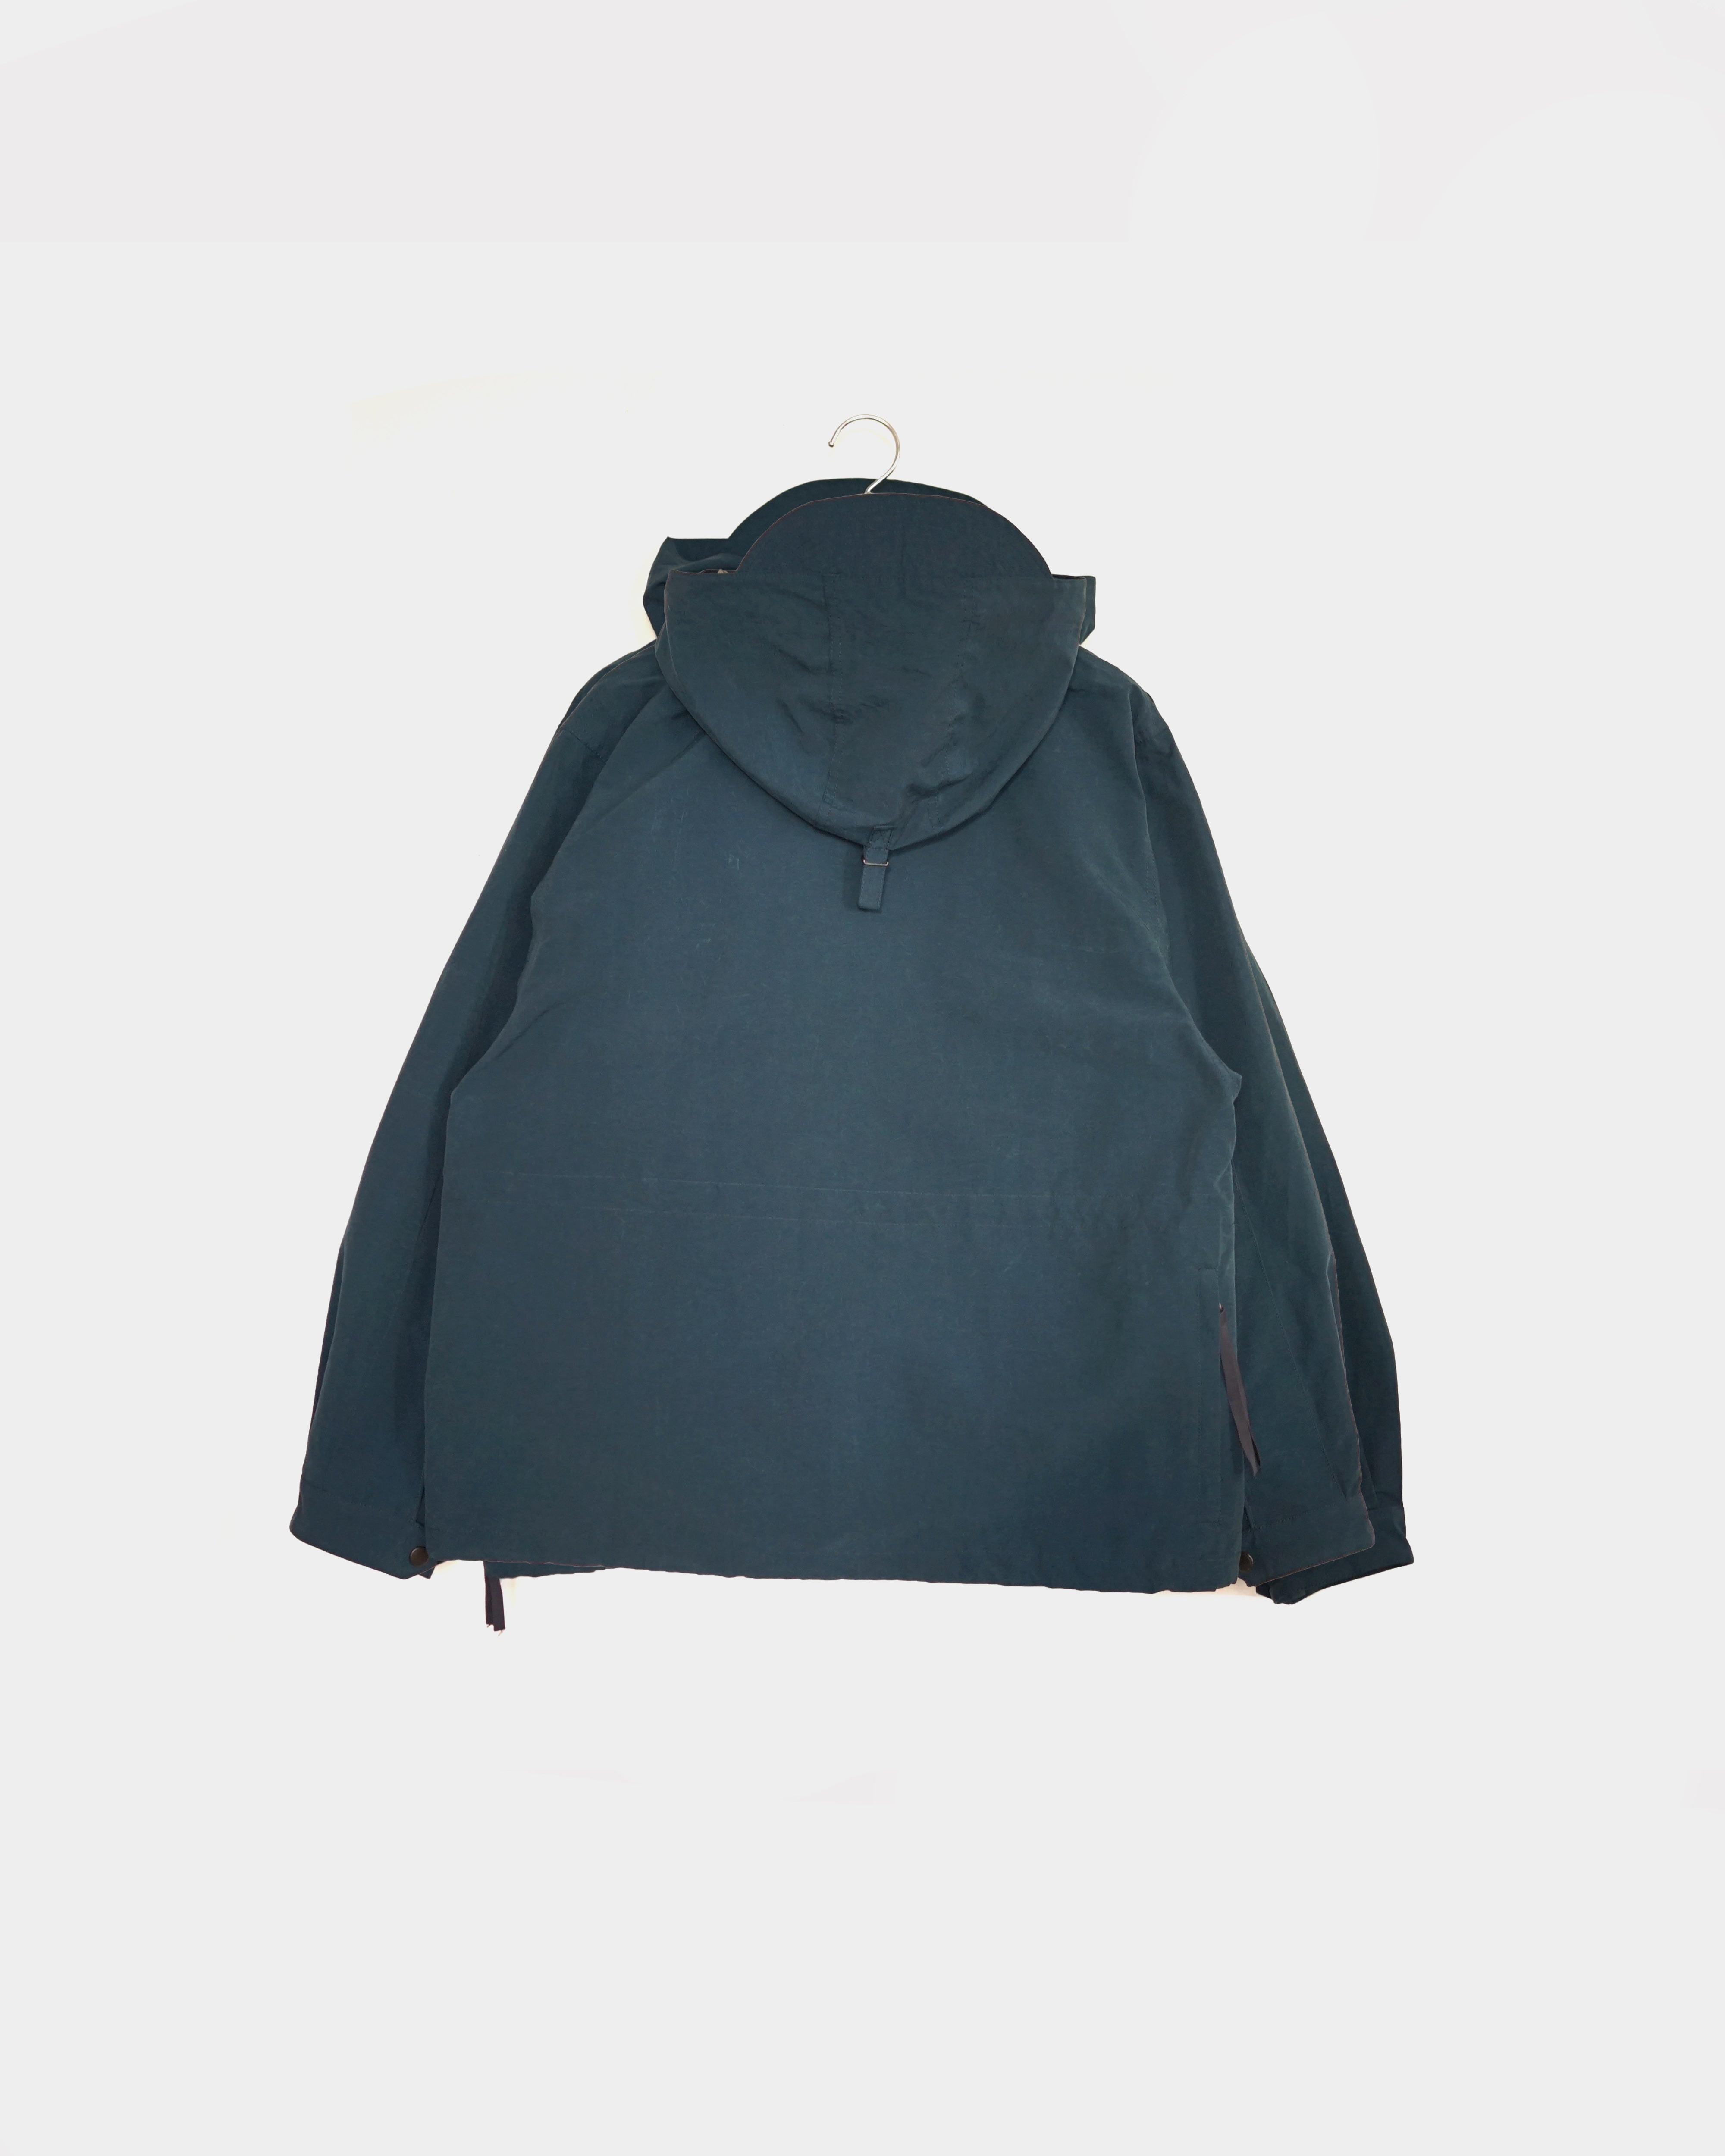 ENDS and MEANS/Sanpo Jacket 